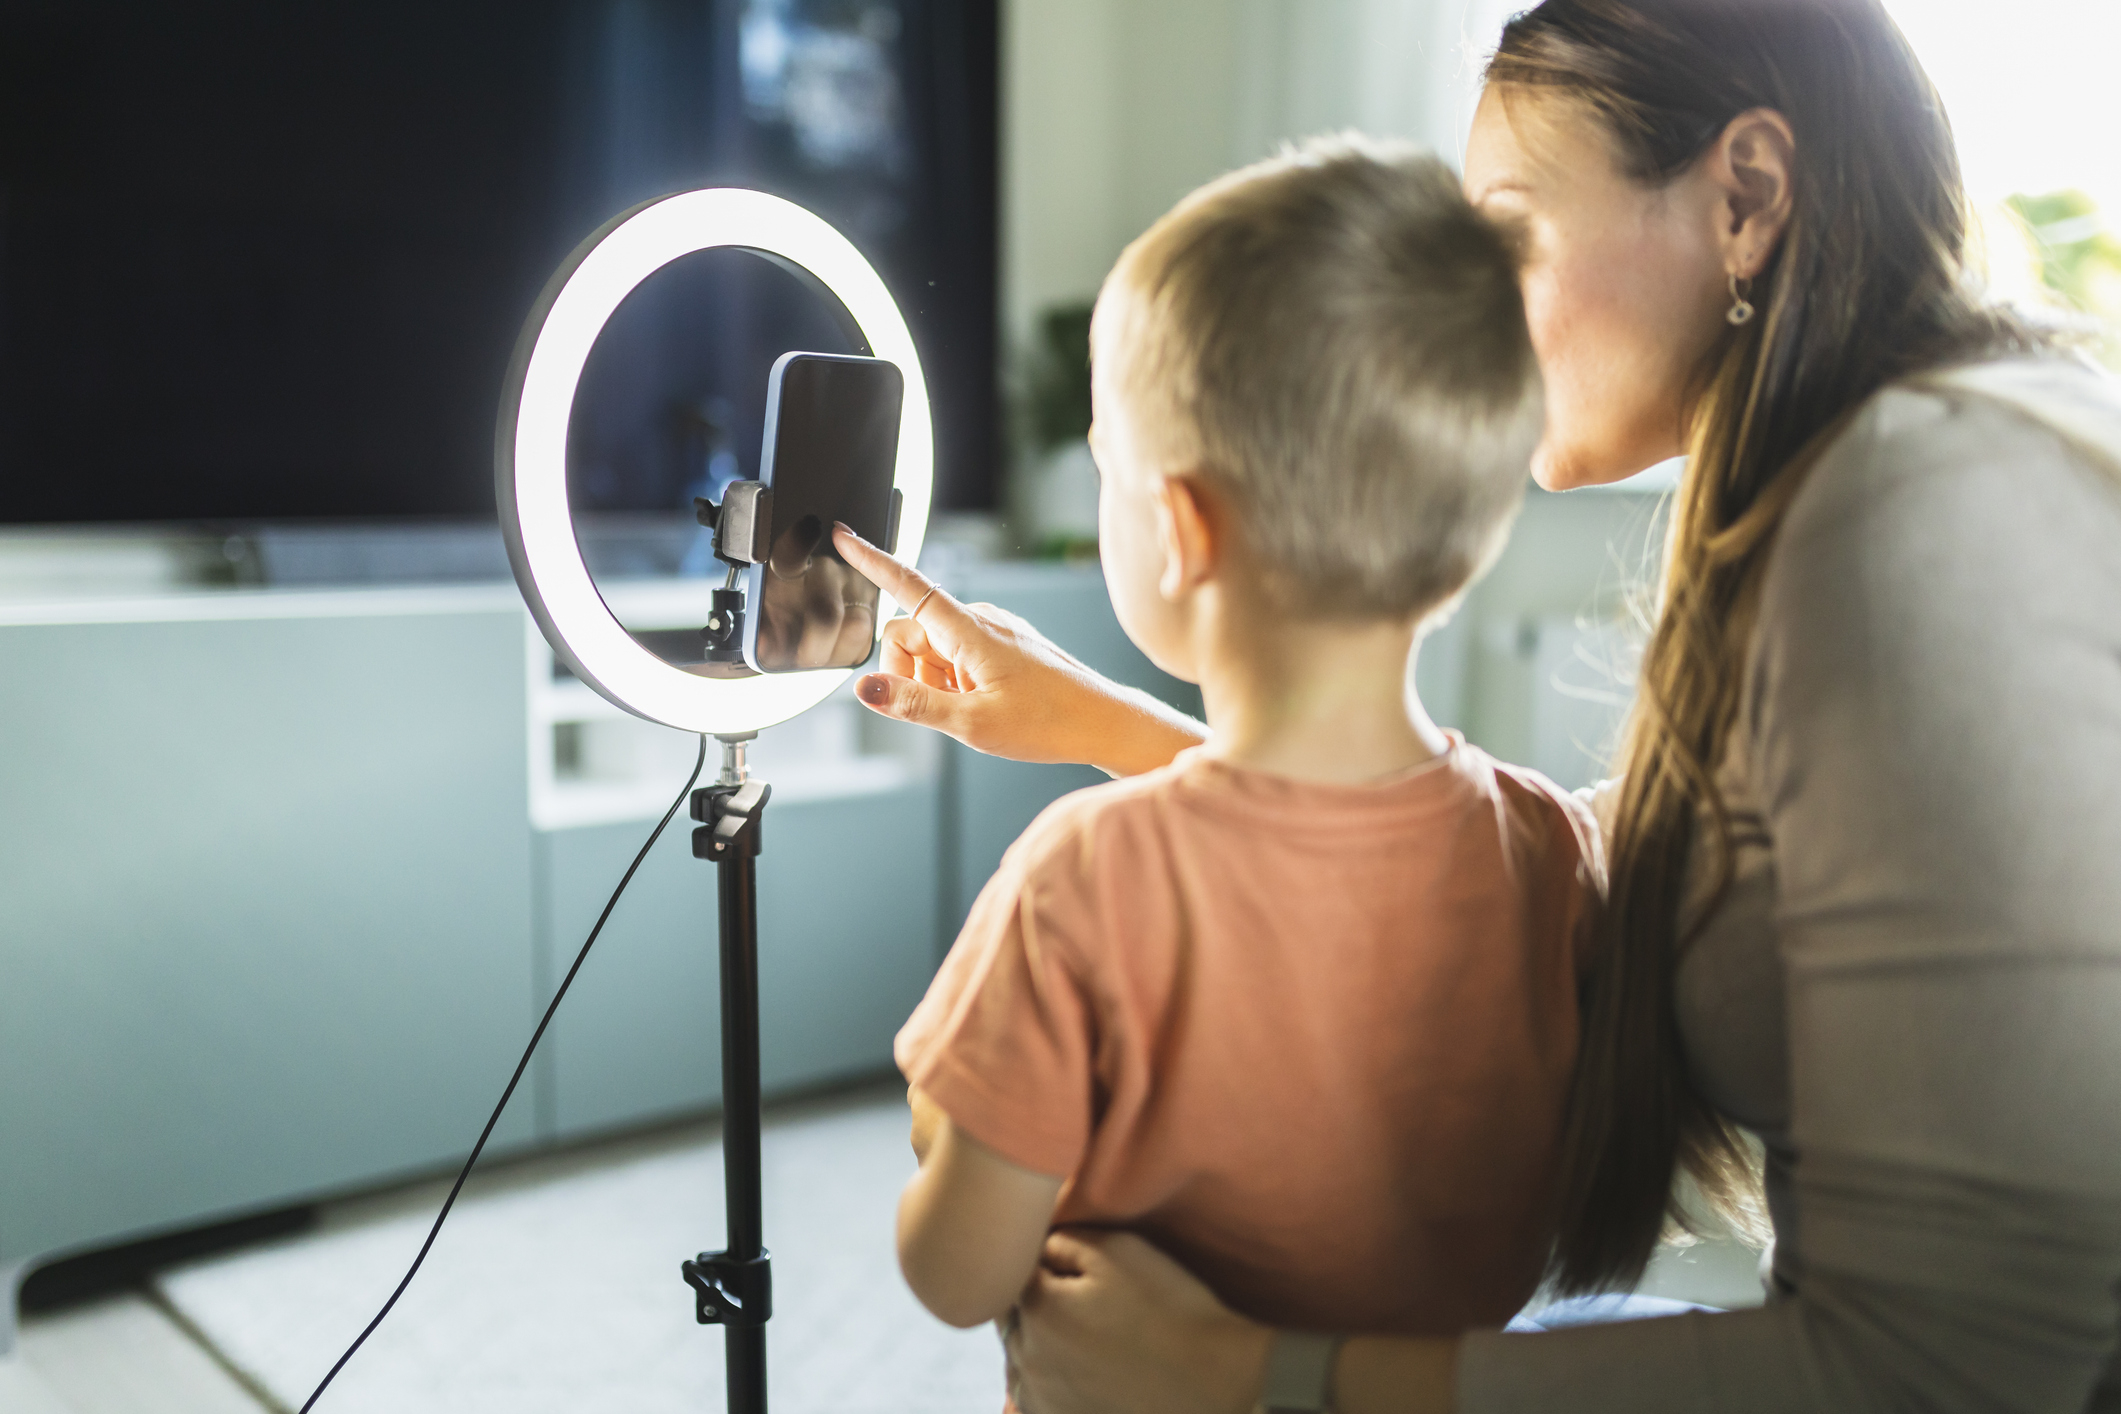 Woman and child using a ring light and smartphone, possibly creating content or connecting with others